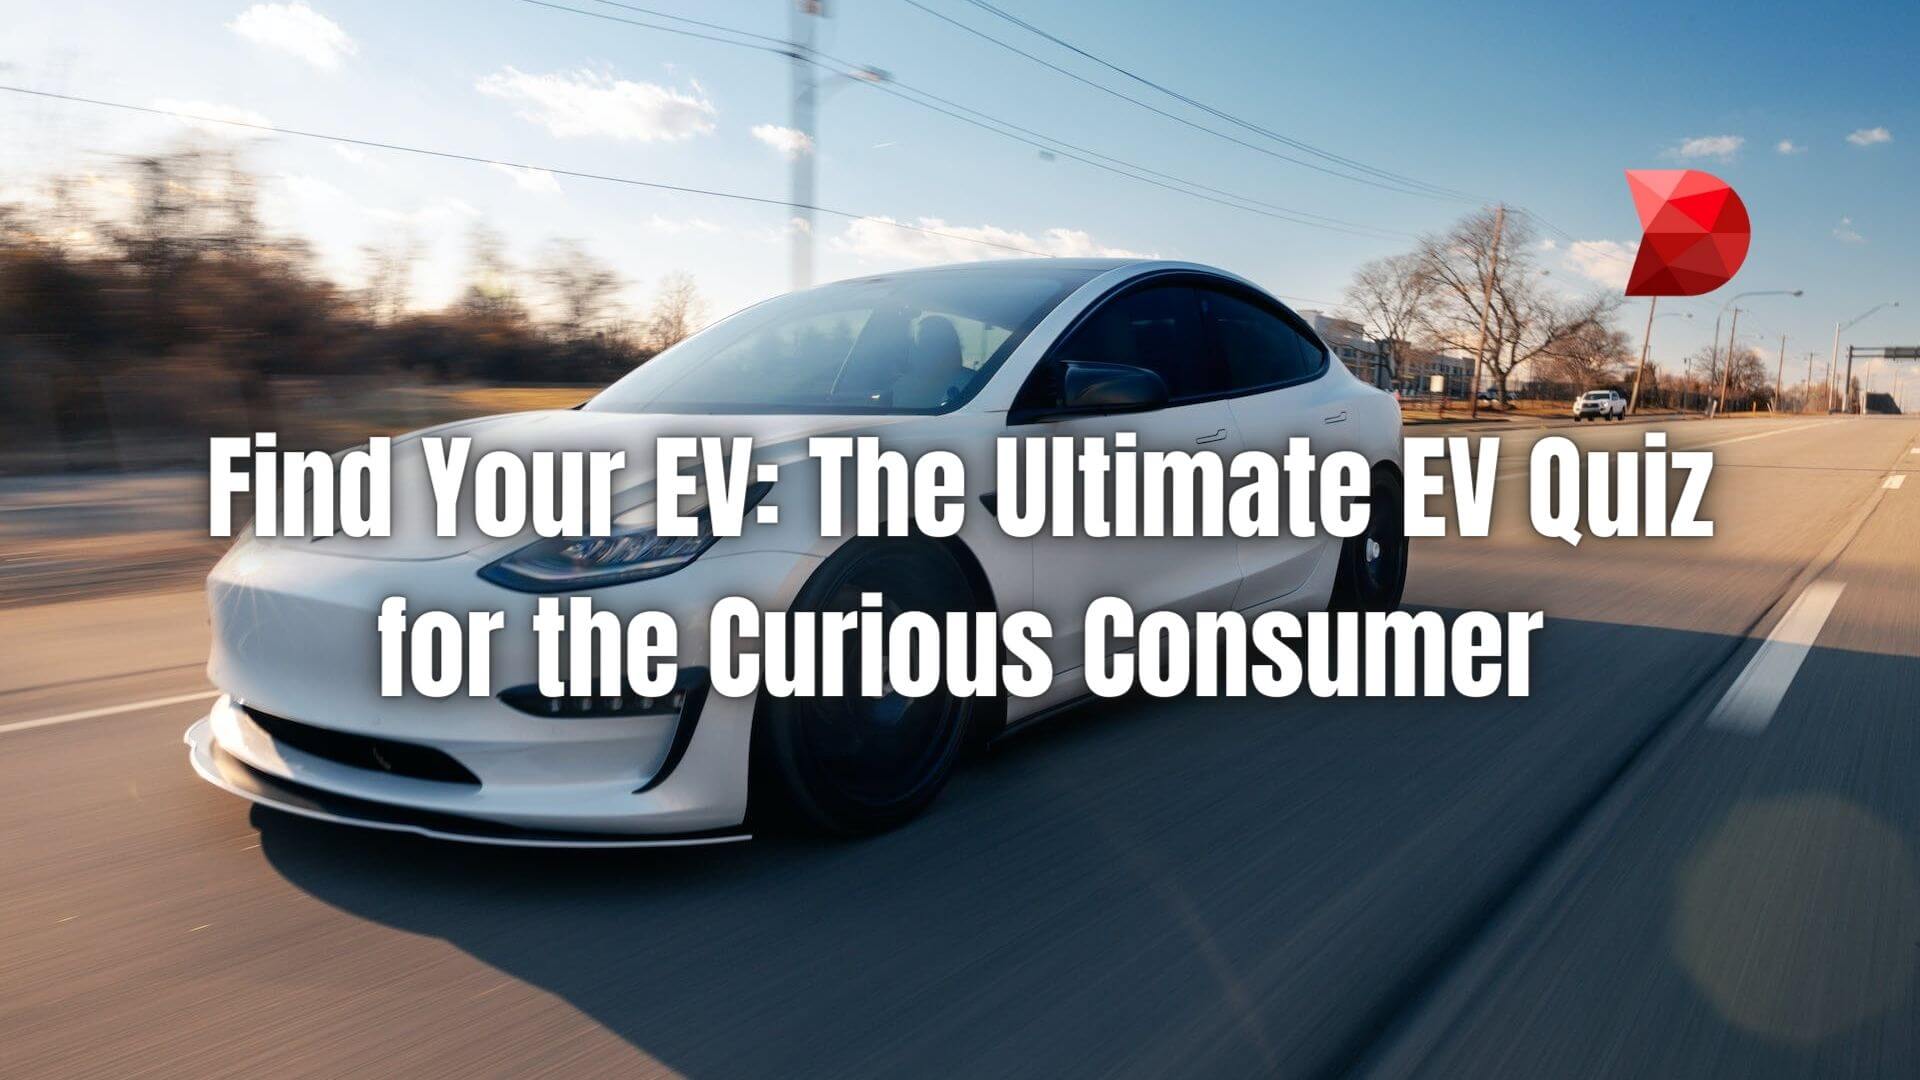 Fueling your curiosity about electric vehicles? Click here to assess your understanding of electric vehicles (EVs) with our consumer quiz.